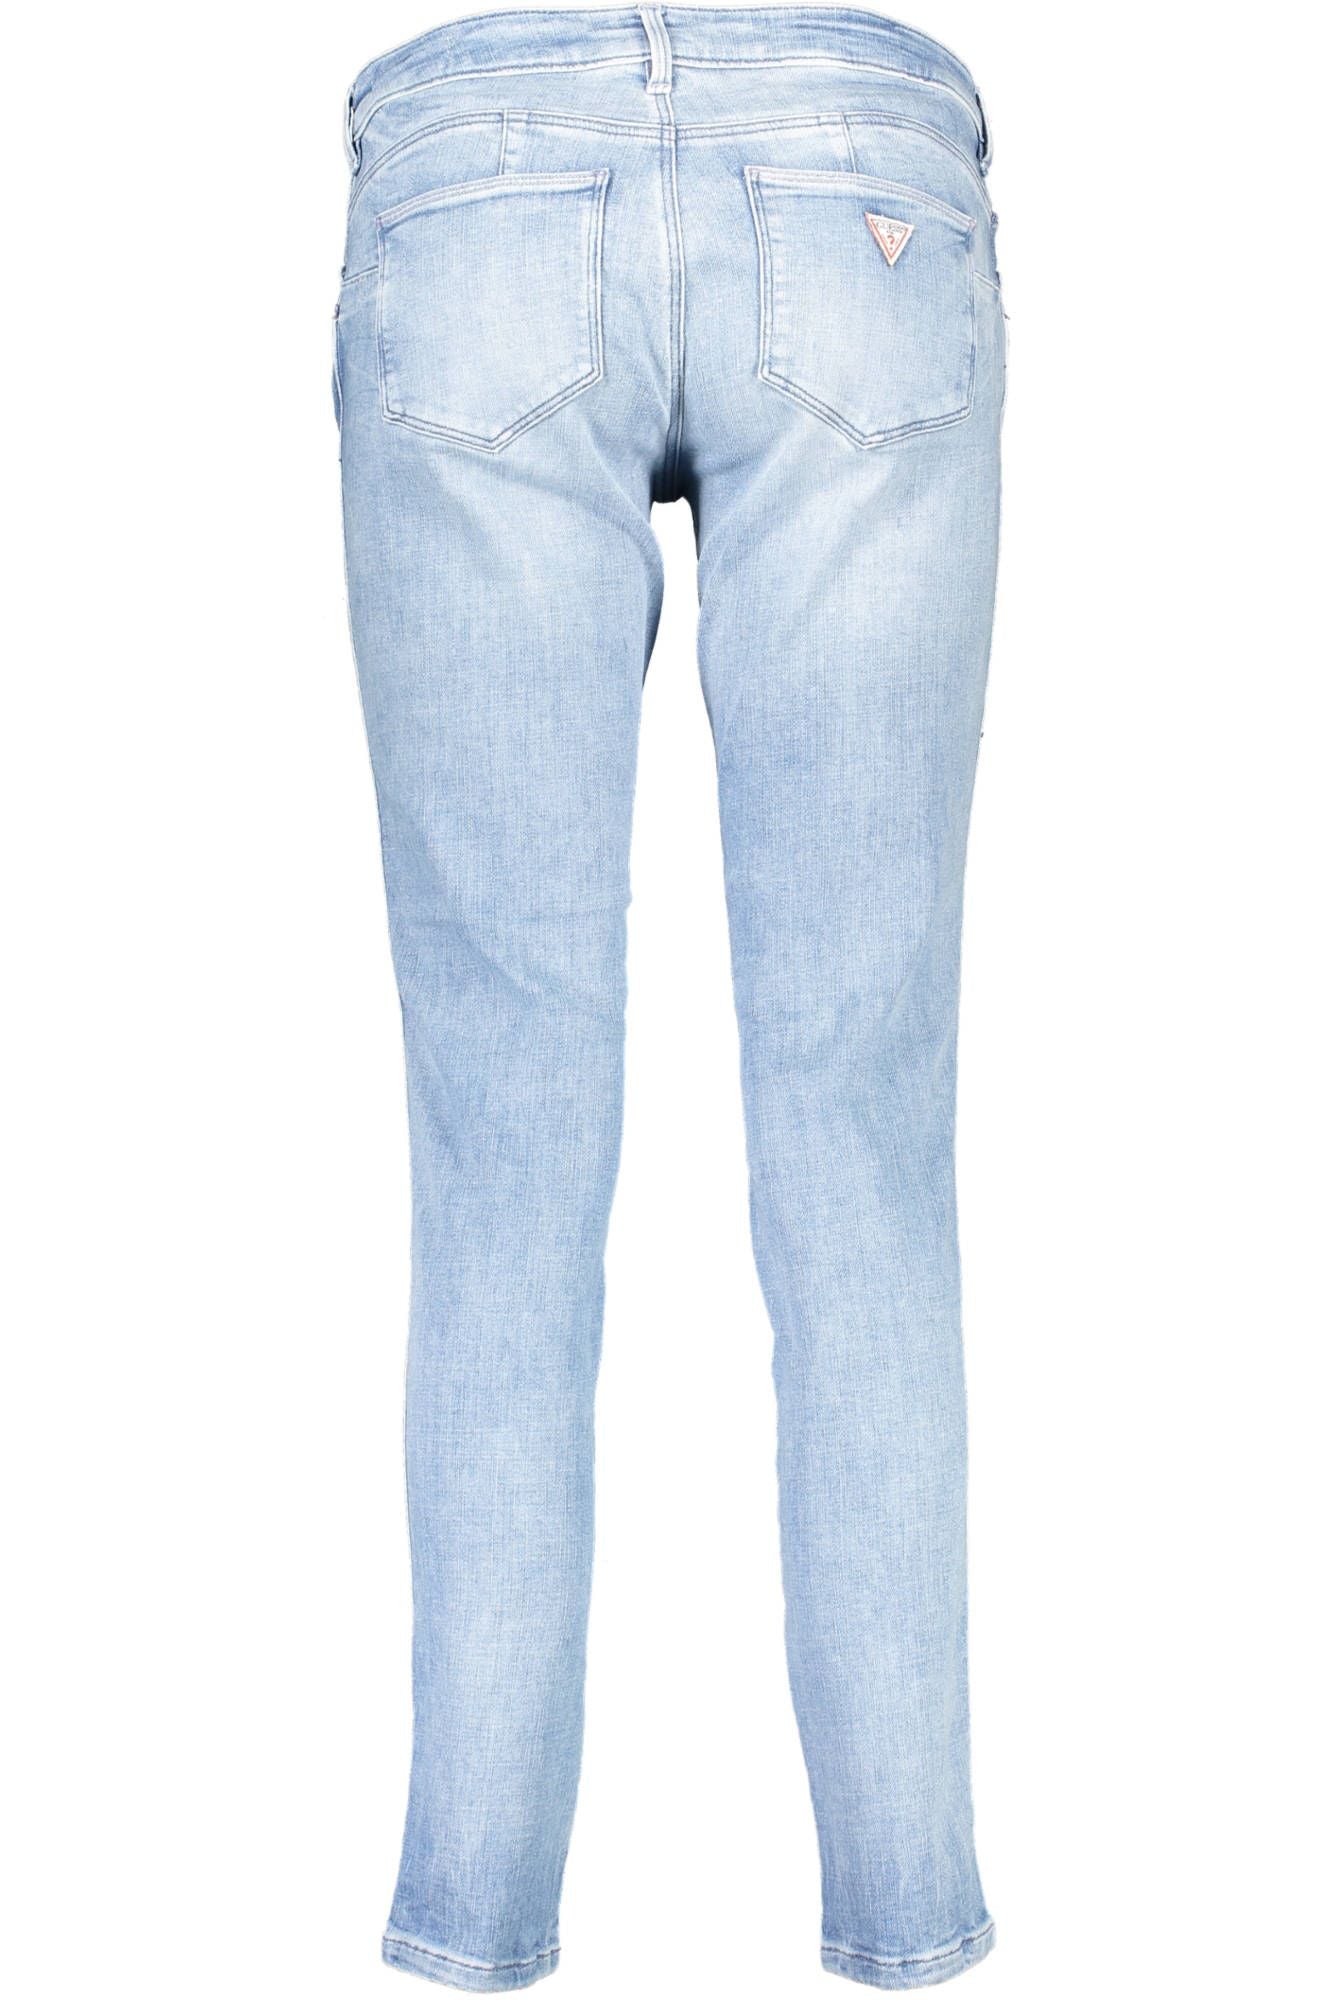 Chic Skinny Mid-Rise Light Blue Jeans